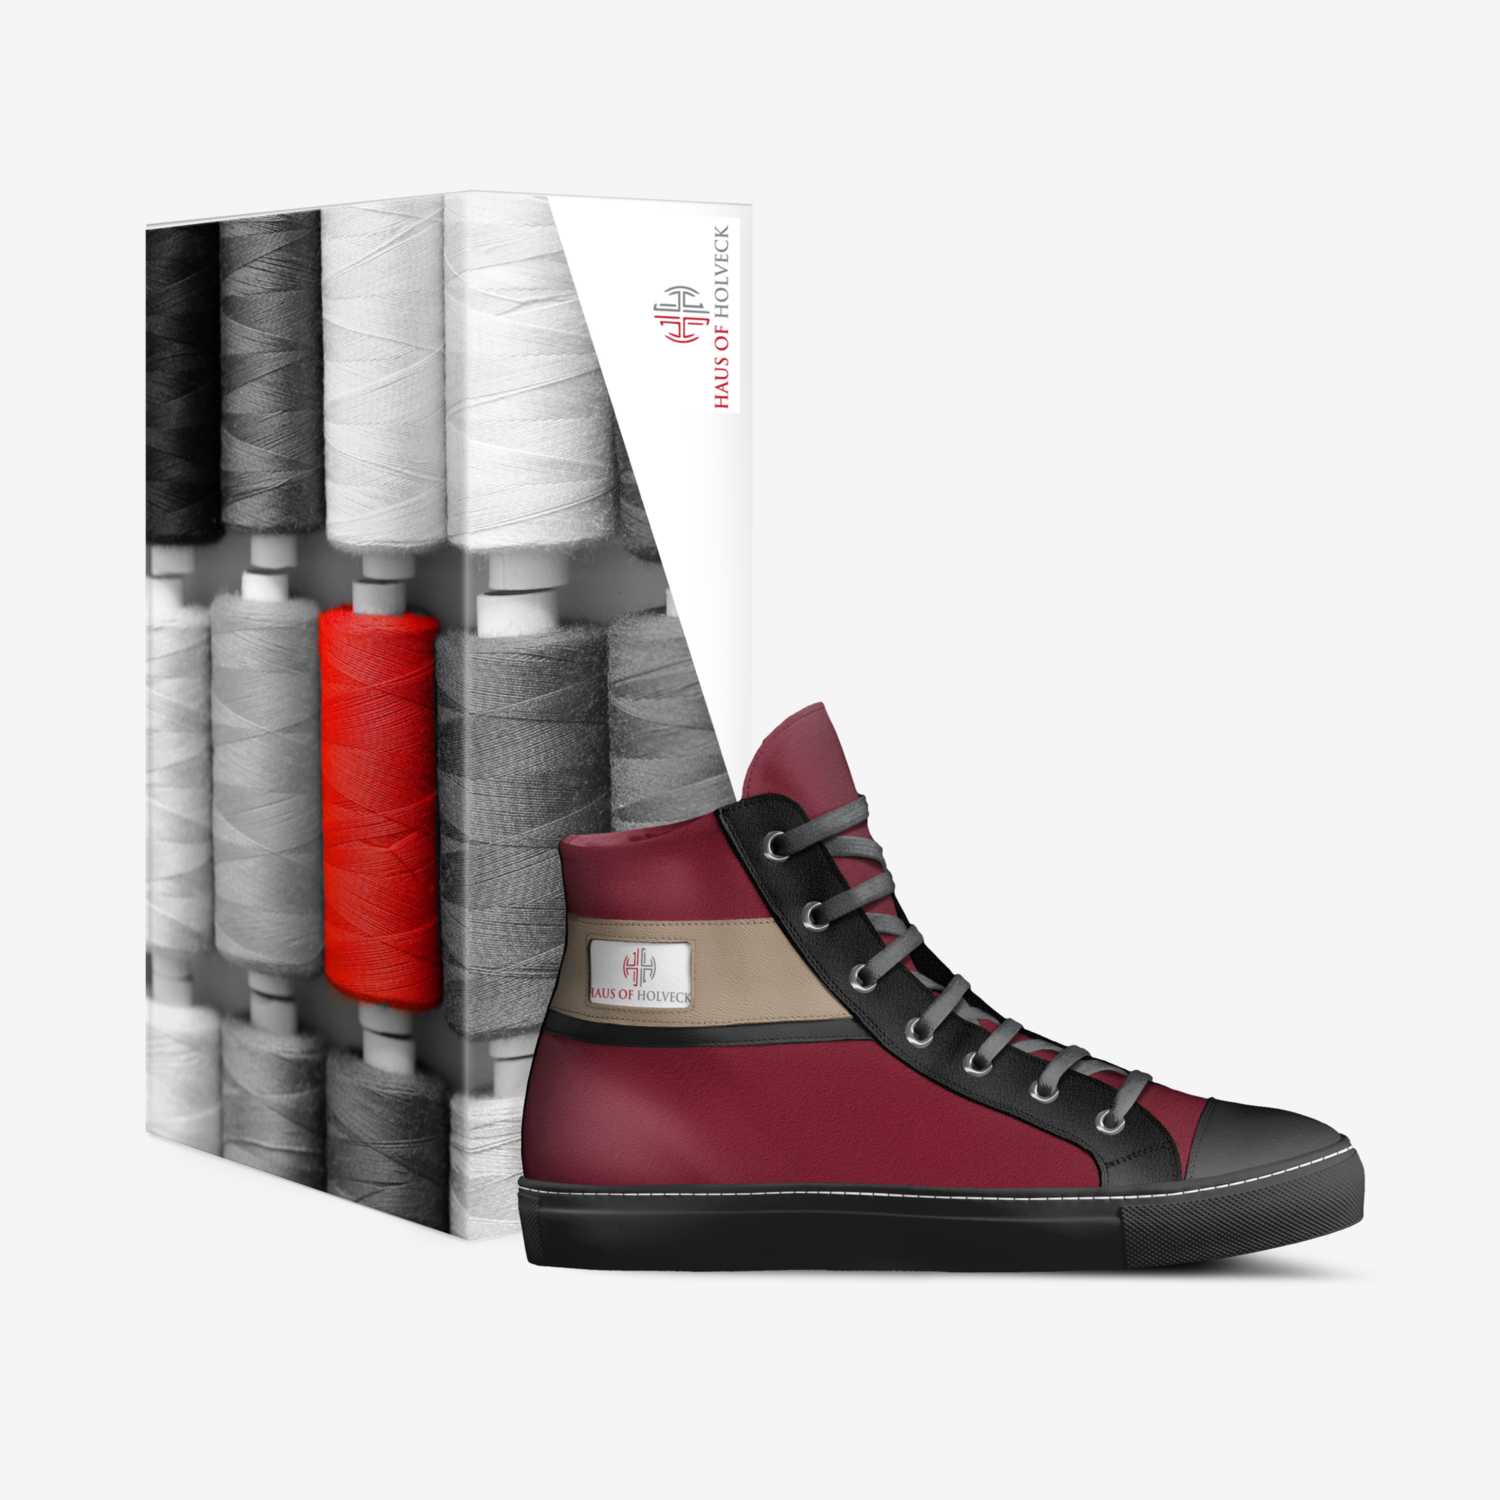 Haus of Holveck custom made in Italy shoes by Henk Meyers | Box view